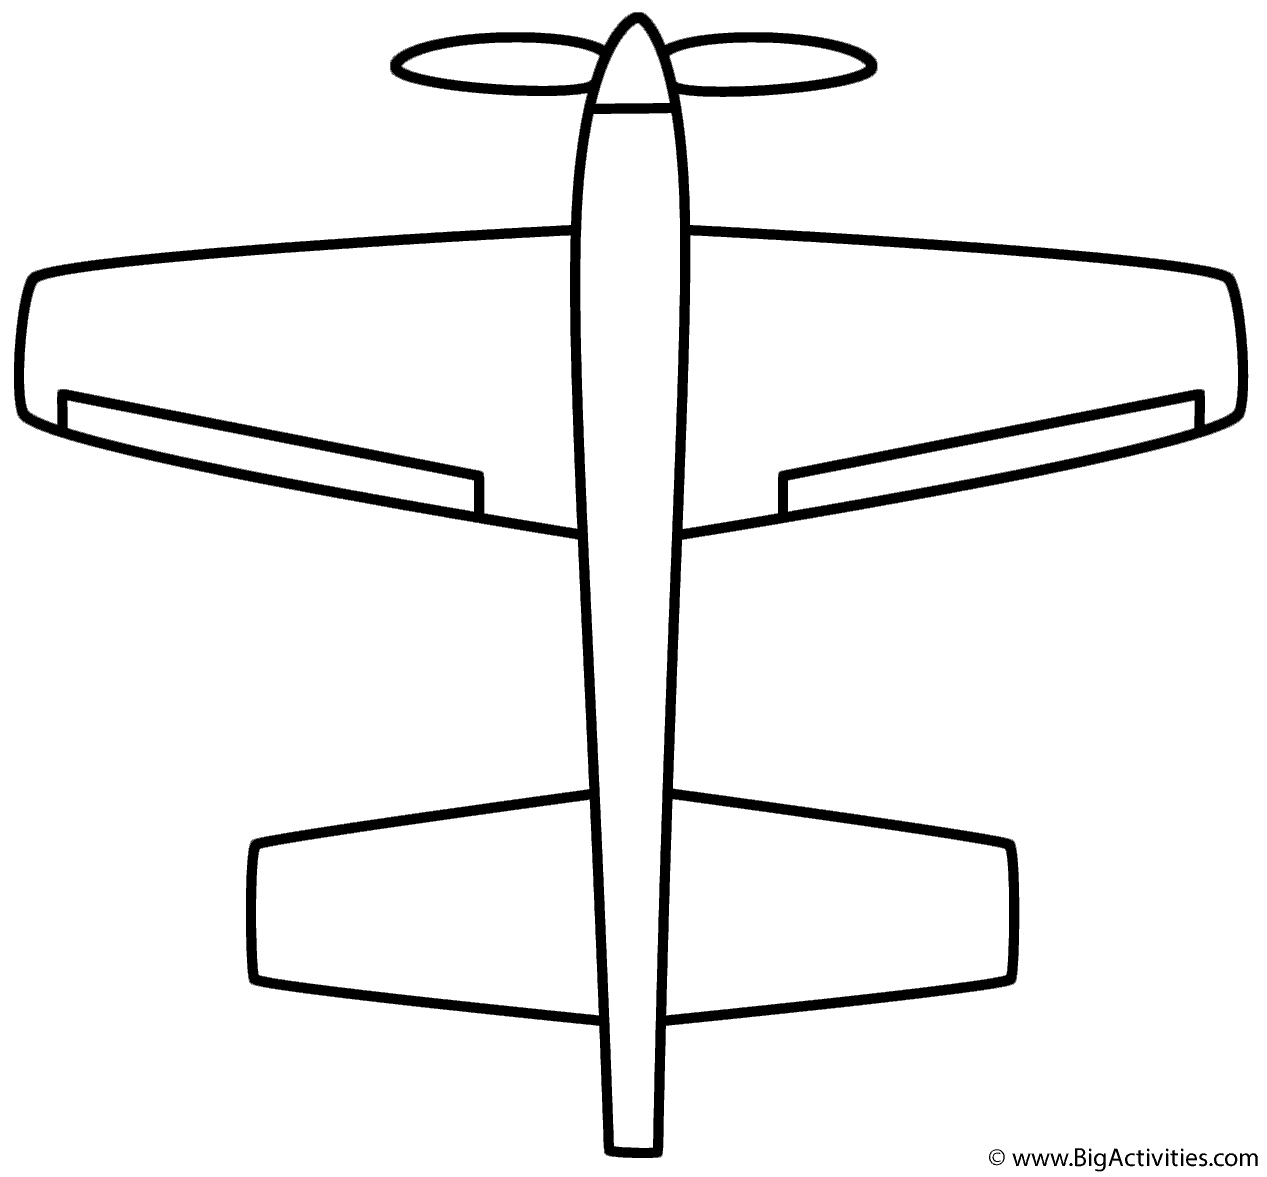 Simple Airplane - Coloring Page (Transportation)